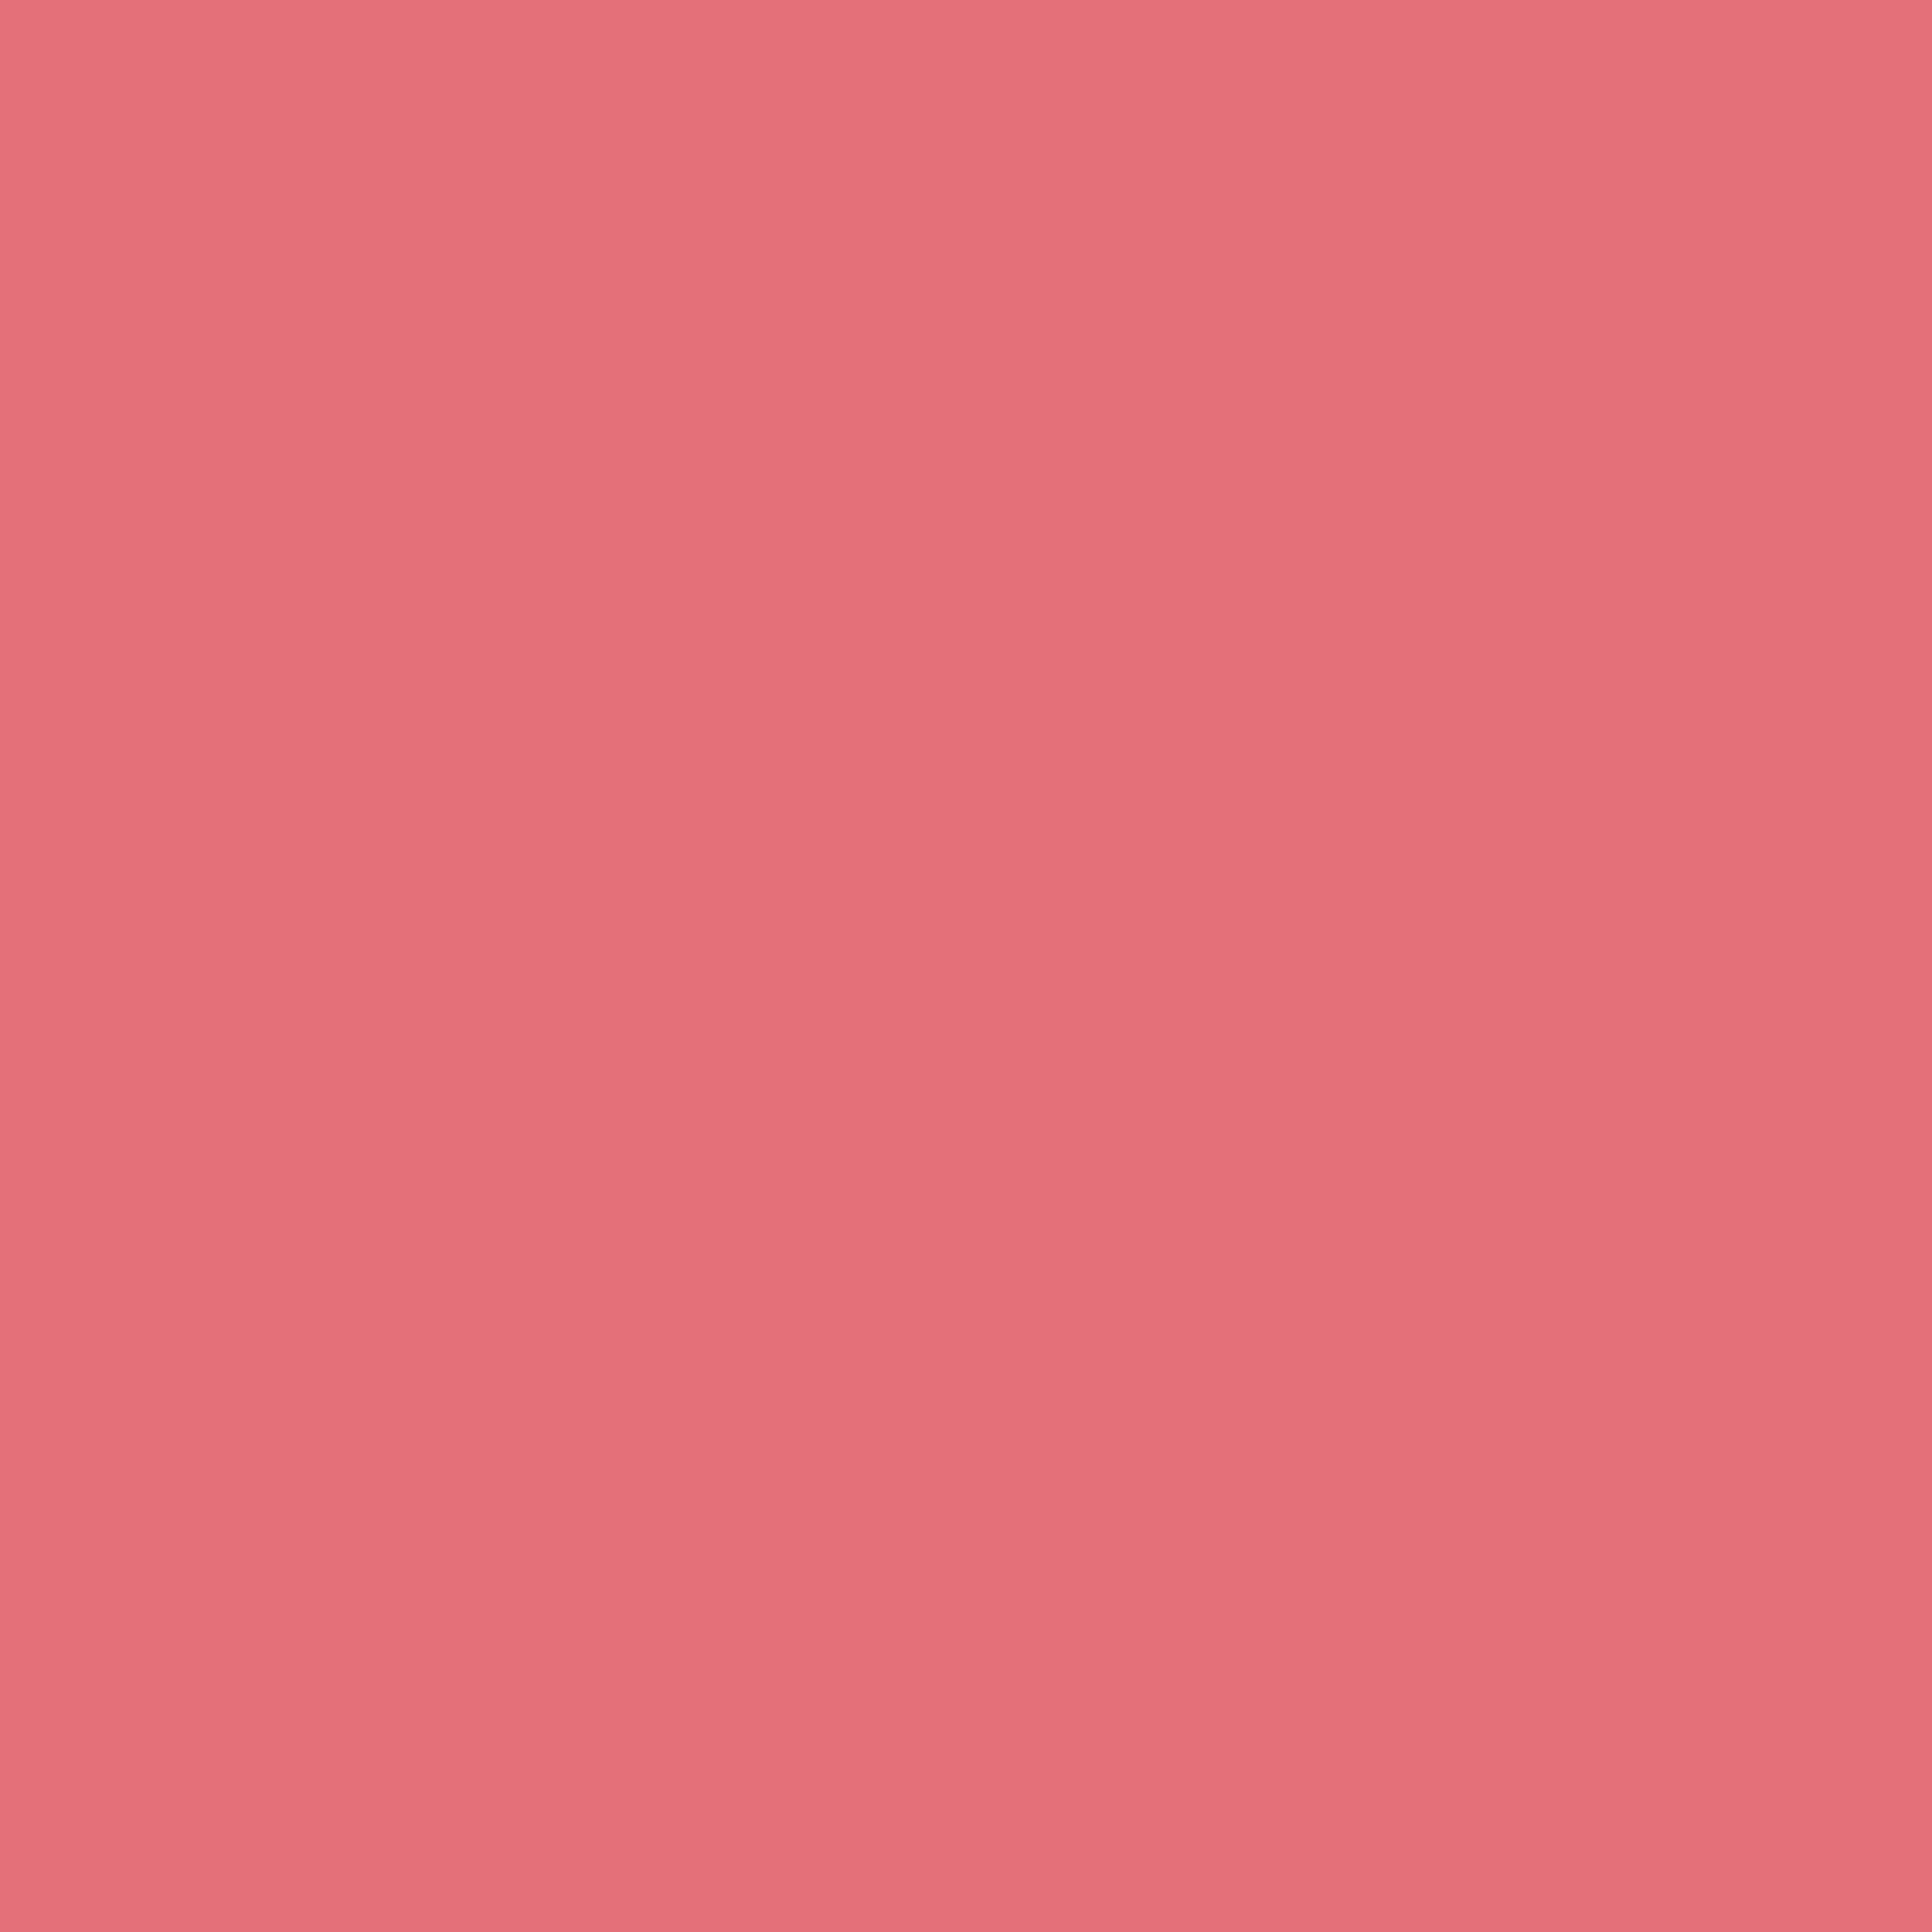 2048x2048 Candy Pink Solid Color Background